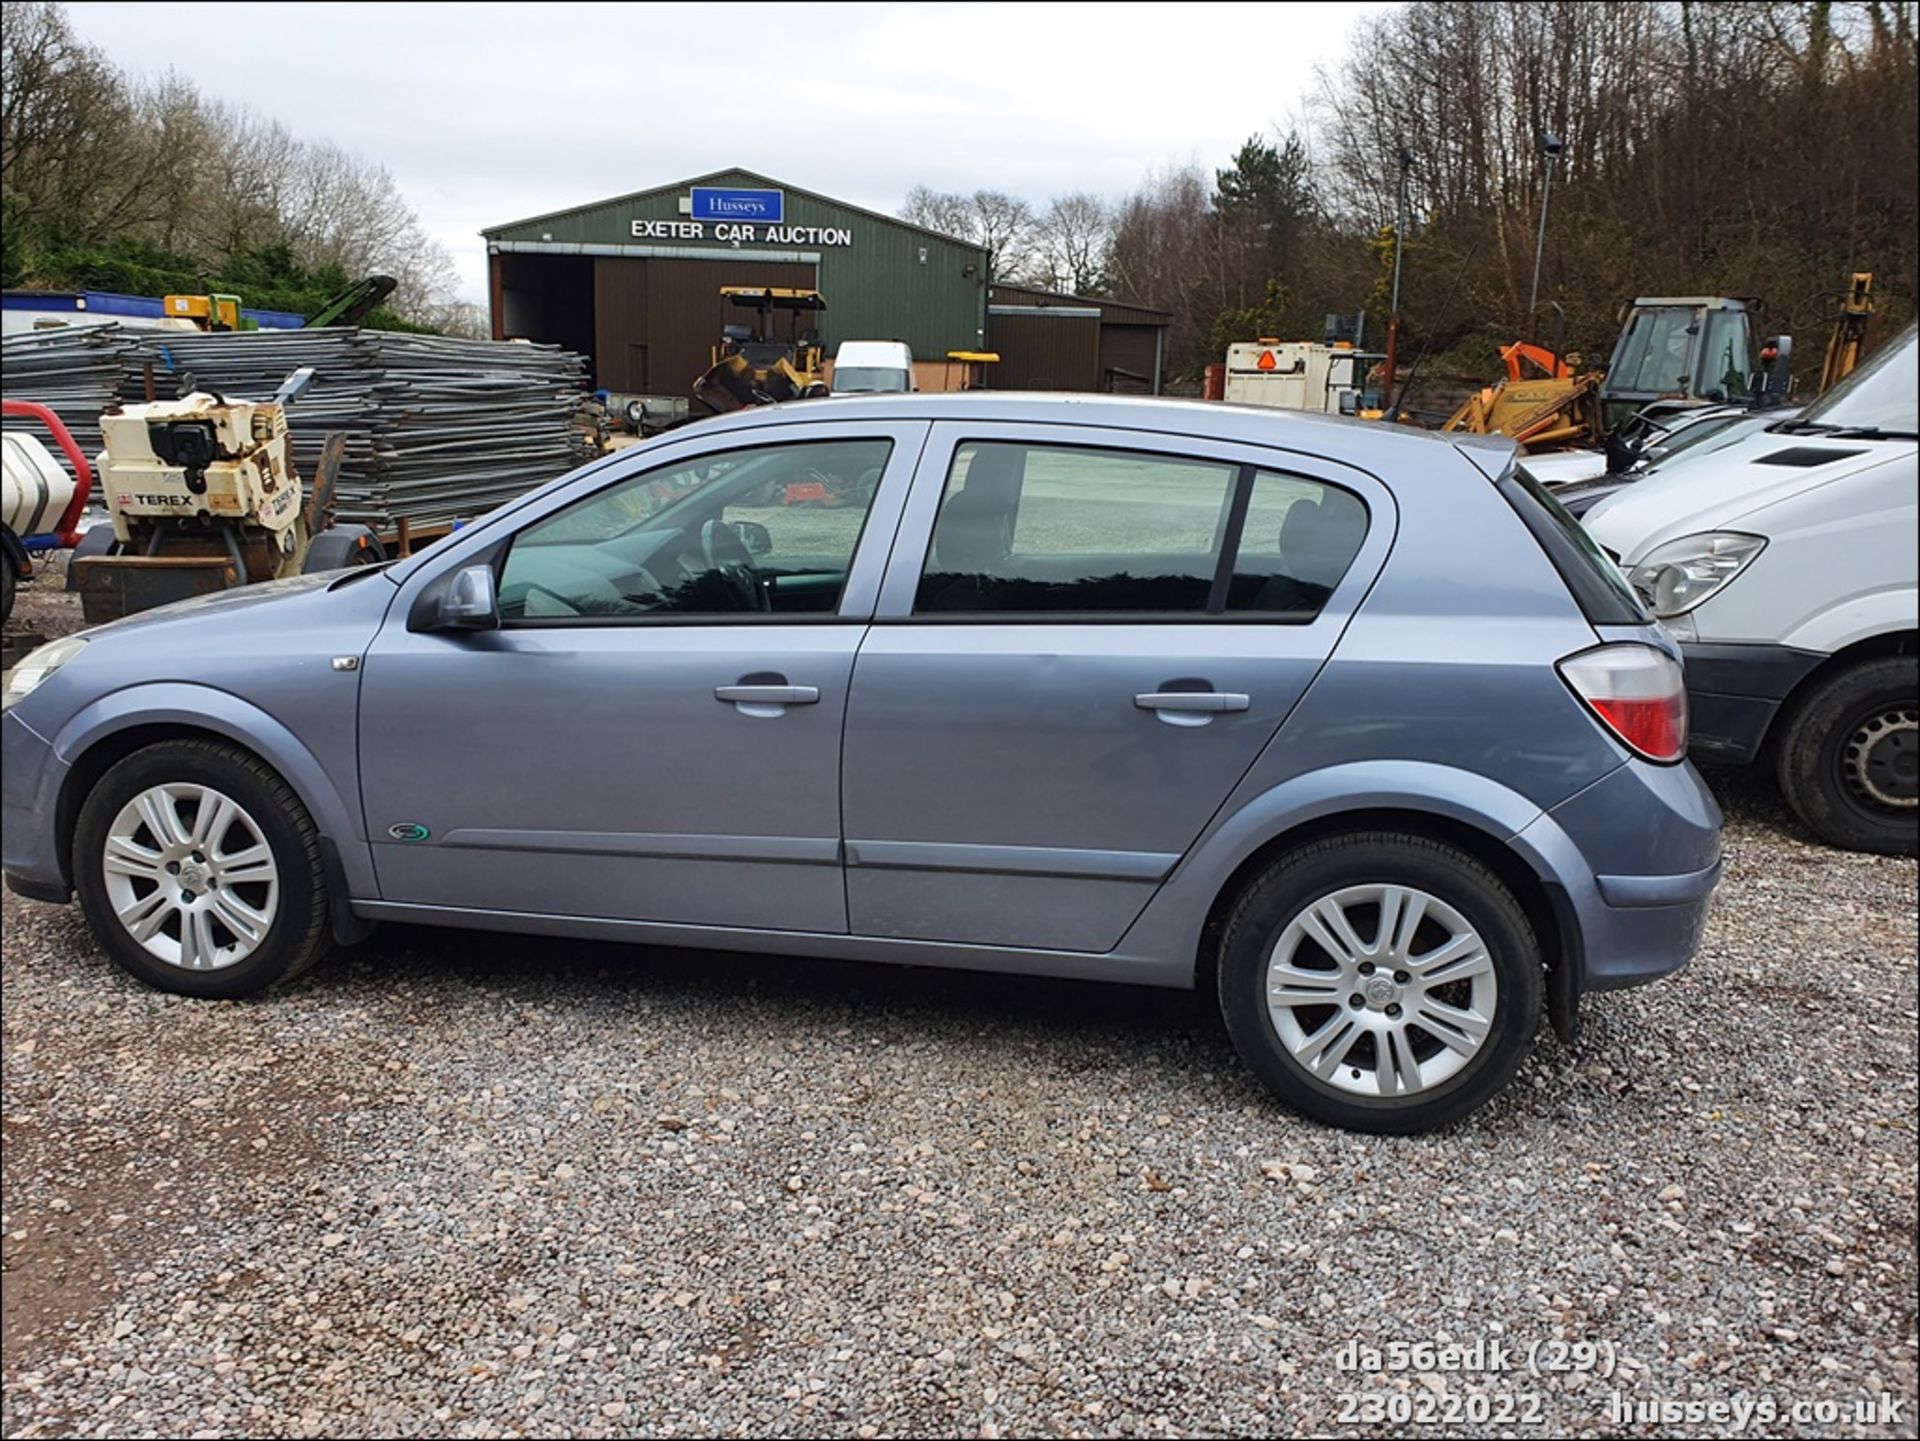 06/56 VAUXHALL ASTRA ACTIVE - 1598cc 5dr Hatchback (Silver) - Image 27 of 42